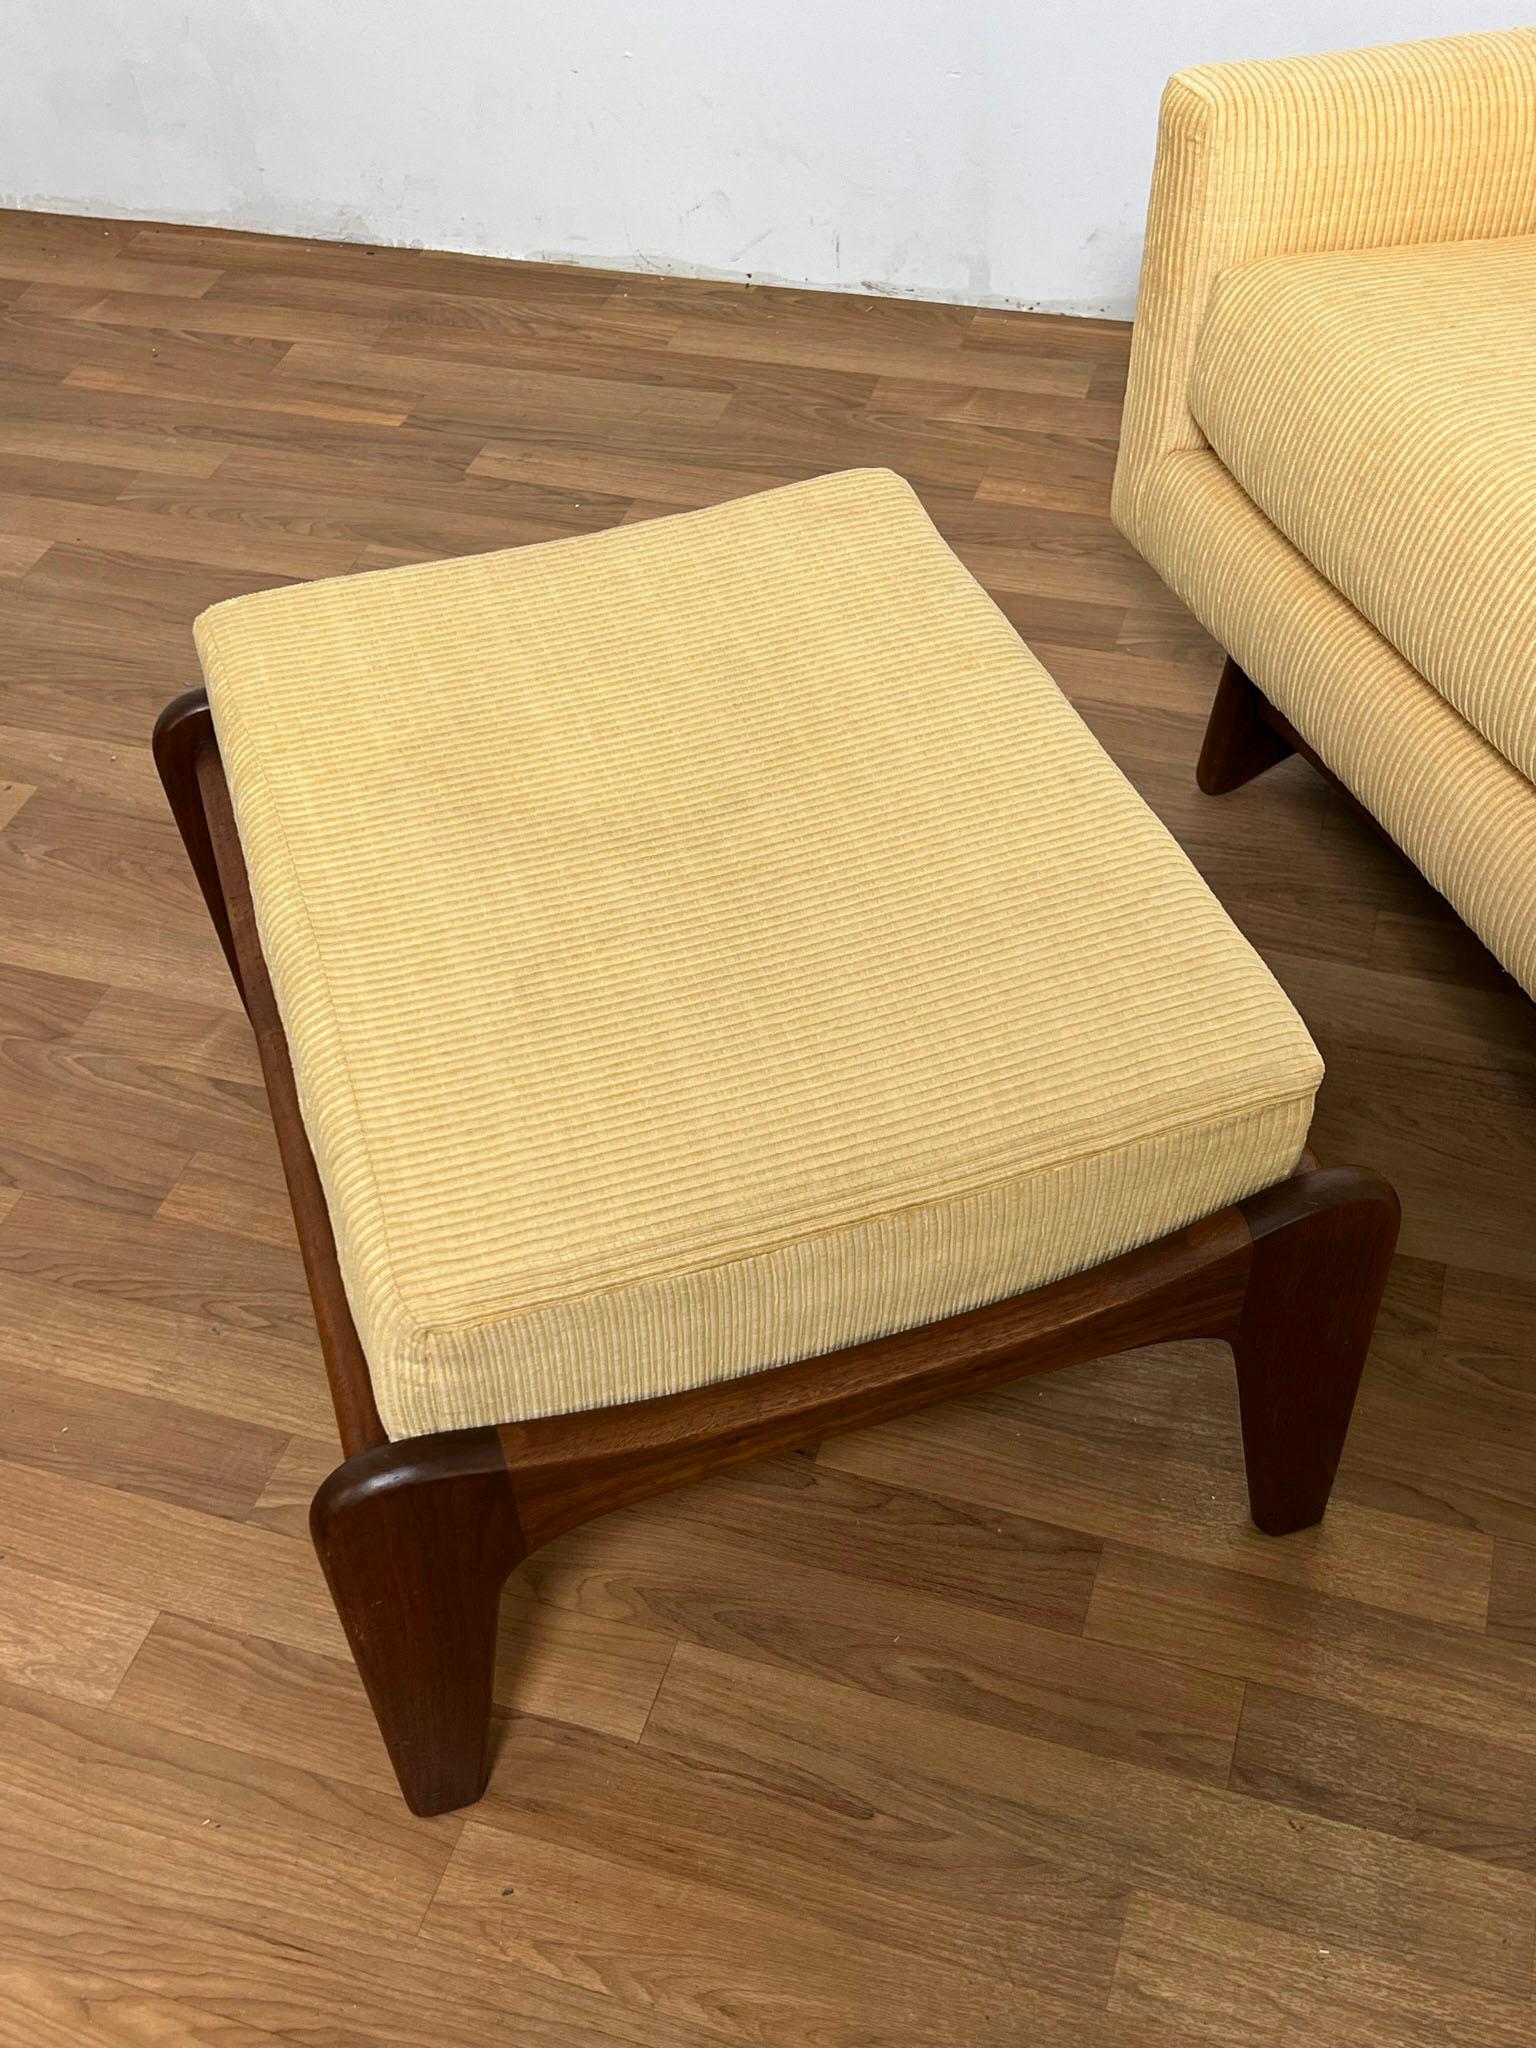 Adrian Pearsall for Craft Associates Lounge Chair and Ottoman, circa 1960s For Sale 4